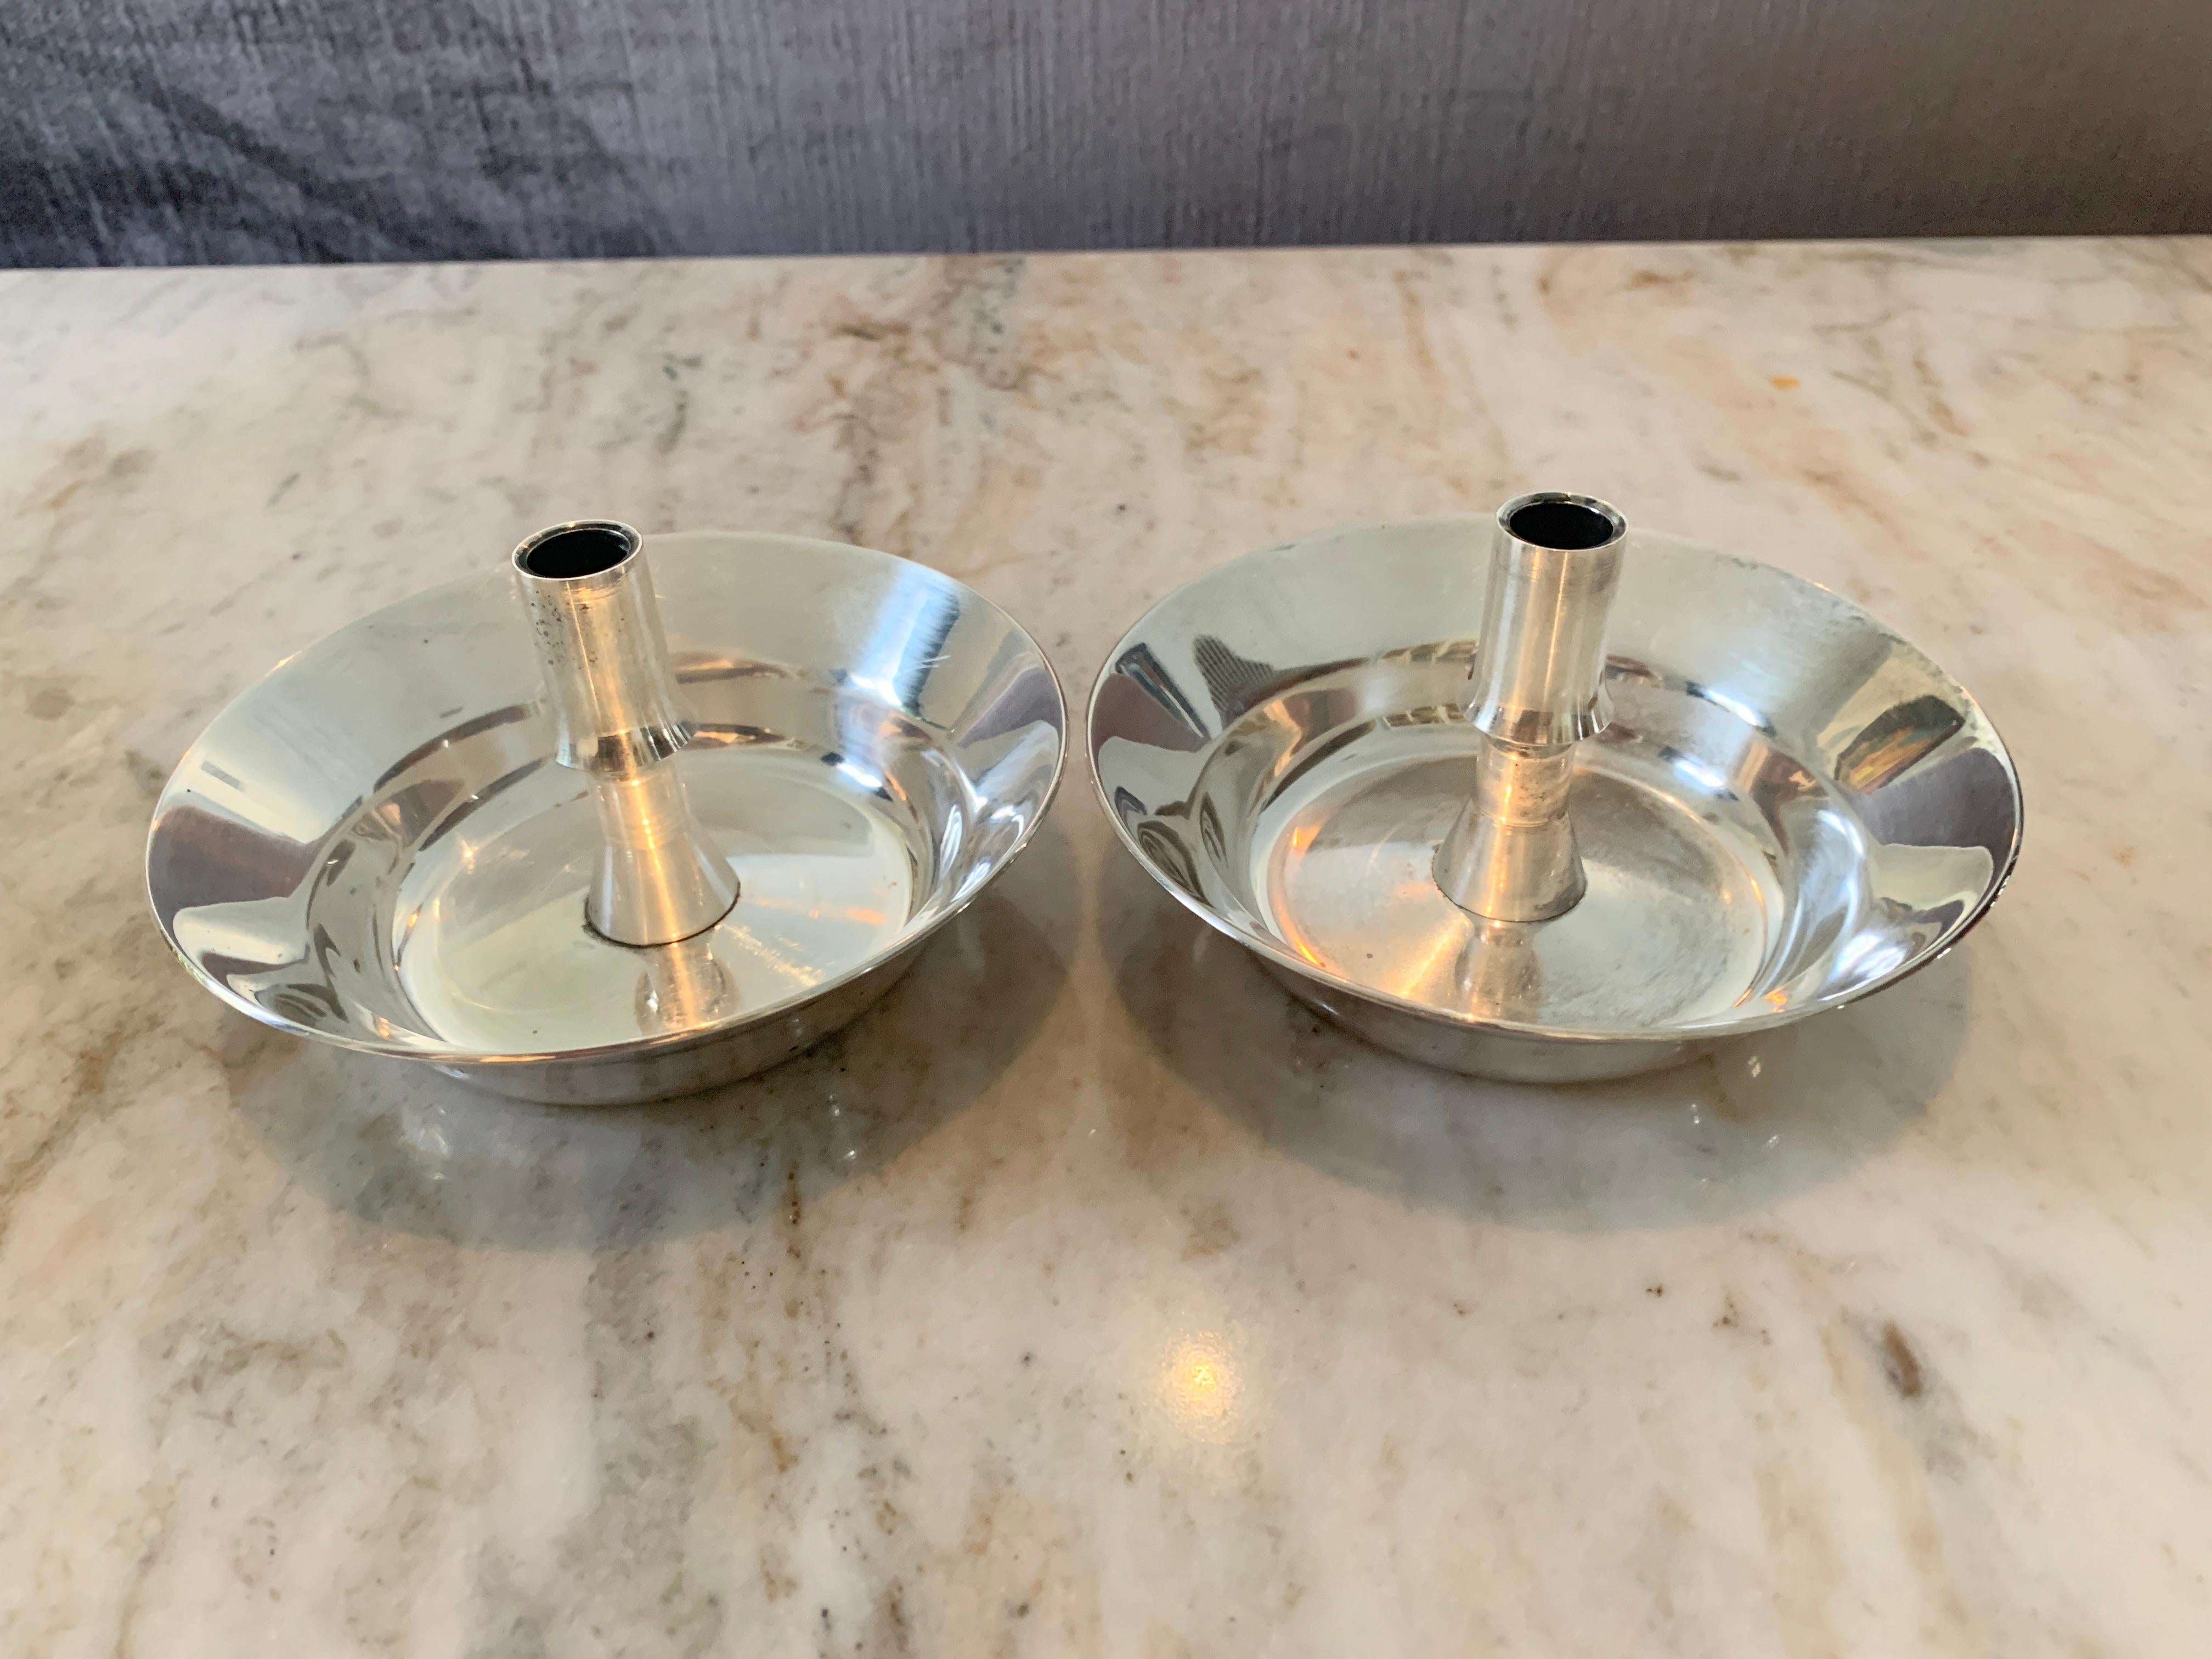 Midcentury sleek, architectural Danish design by Jens H Quistgaard and produced by Dansk Designs Copenhagen. Pair of silver-plate ‘saucer’ candle holders, the pair can easily work in both casual and formal settings, Dansk Designs Denmark IHQ.
 